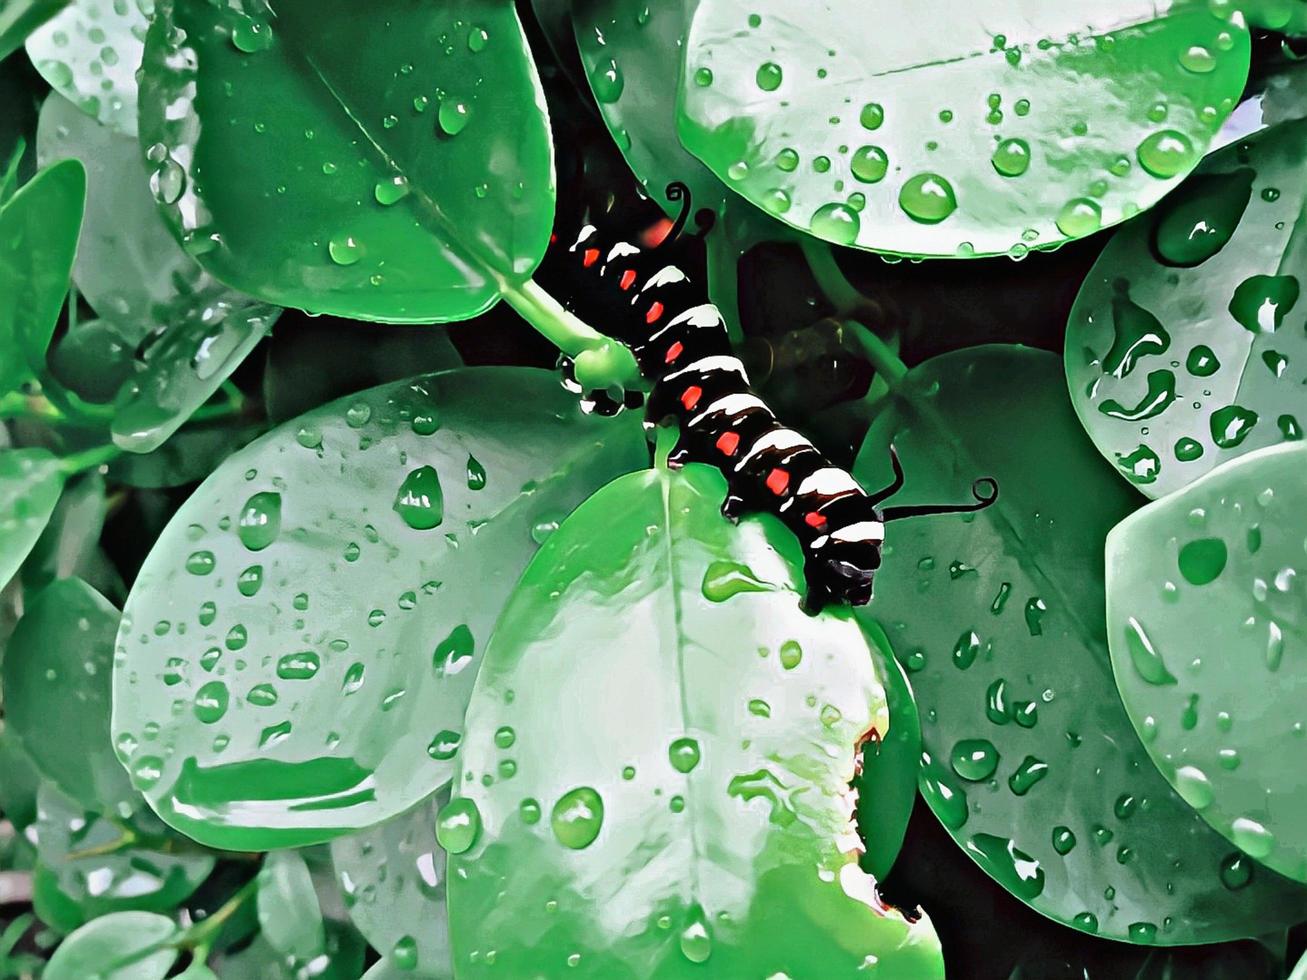 the king caterpillar on a wet green leaf is eating a leaf photo